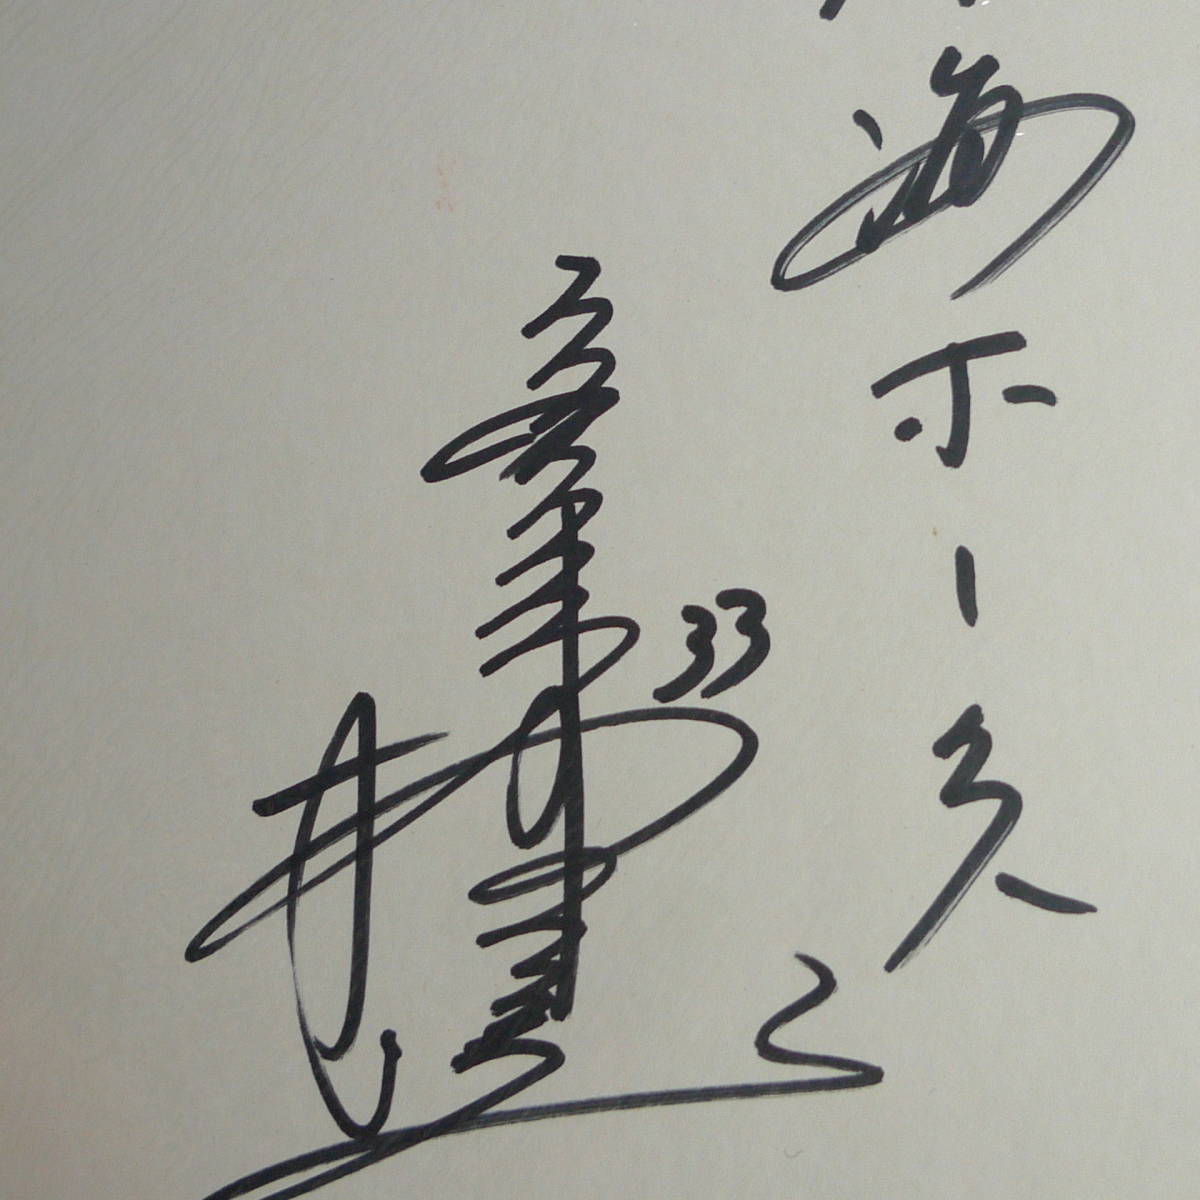 n2533*. guarantee temple male two southern sea Hawk s autograph autograph square fancy cardboard *. number 33 Professional Baseball player goods 